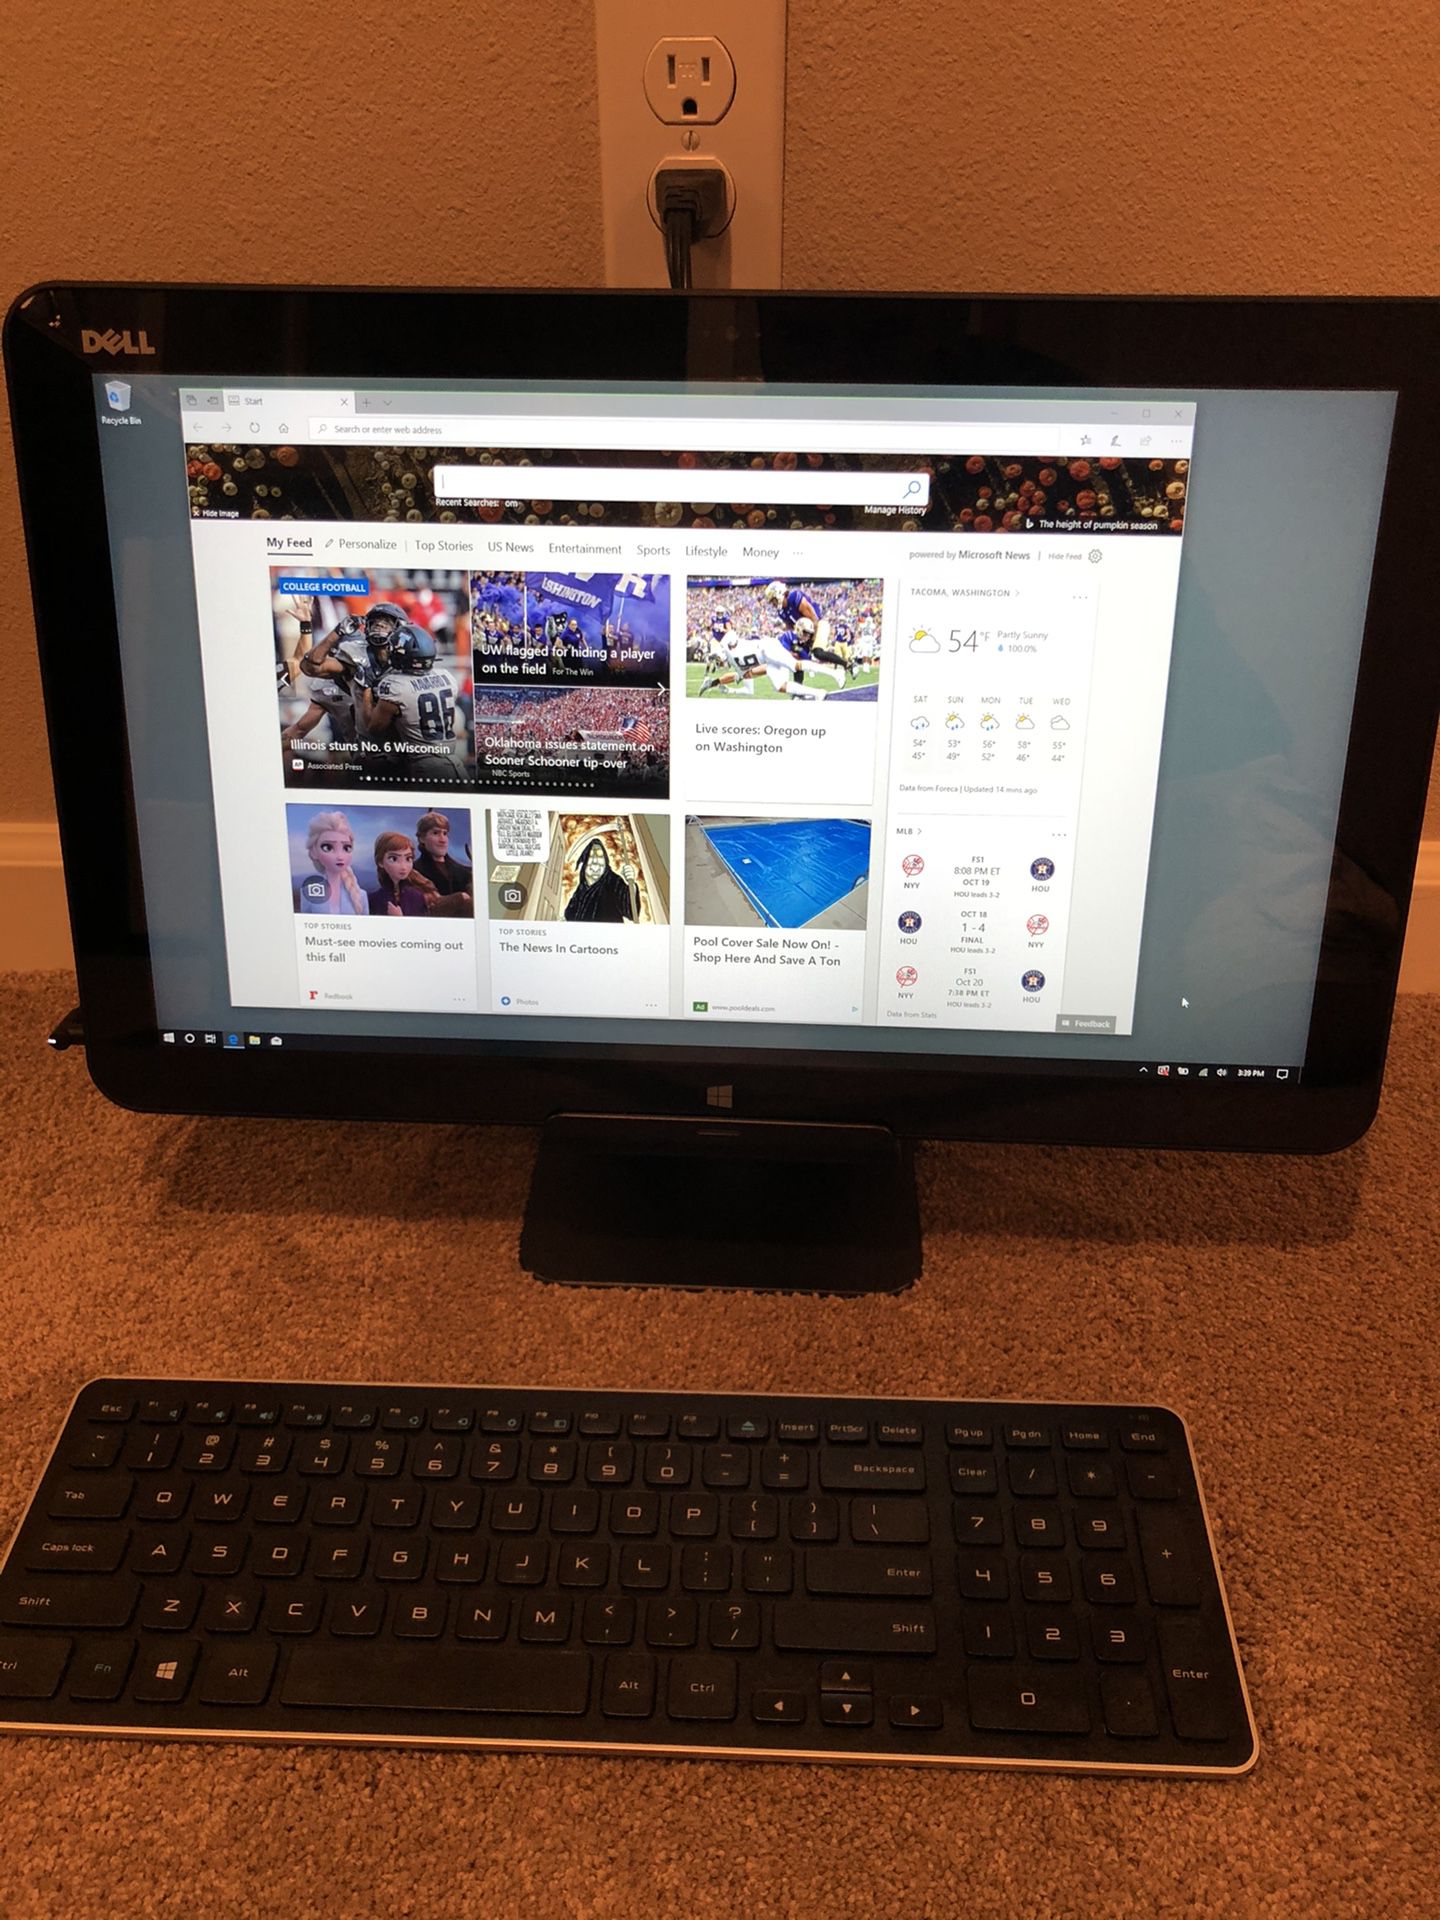 Dell all in one computer